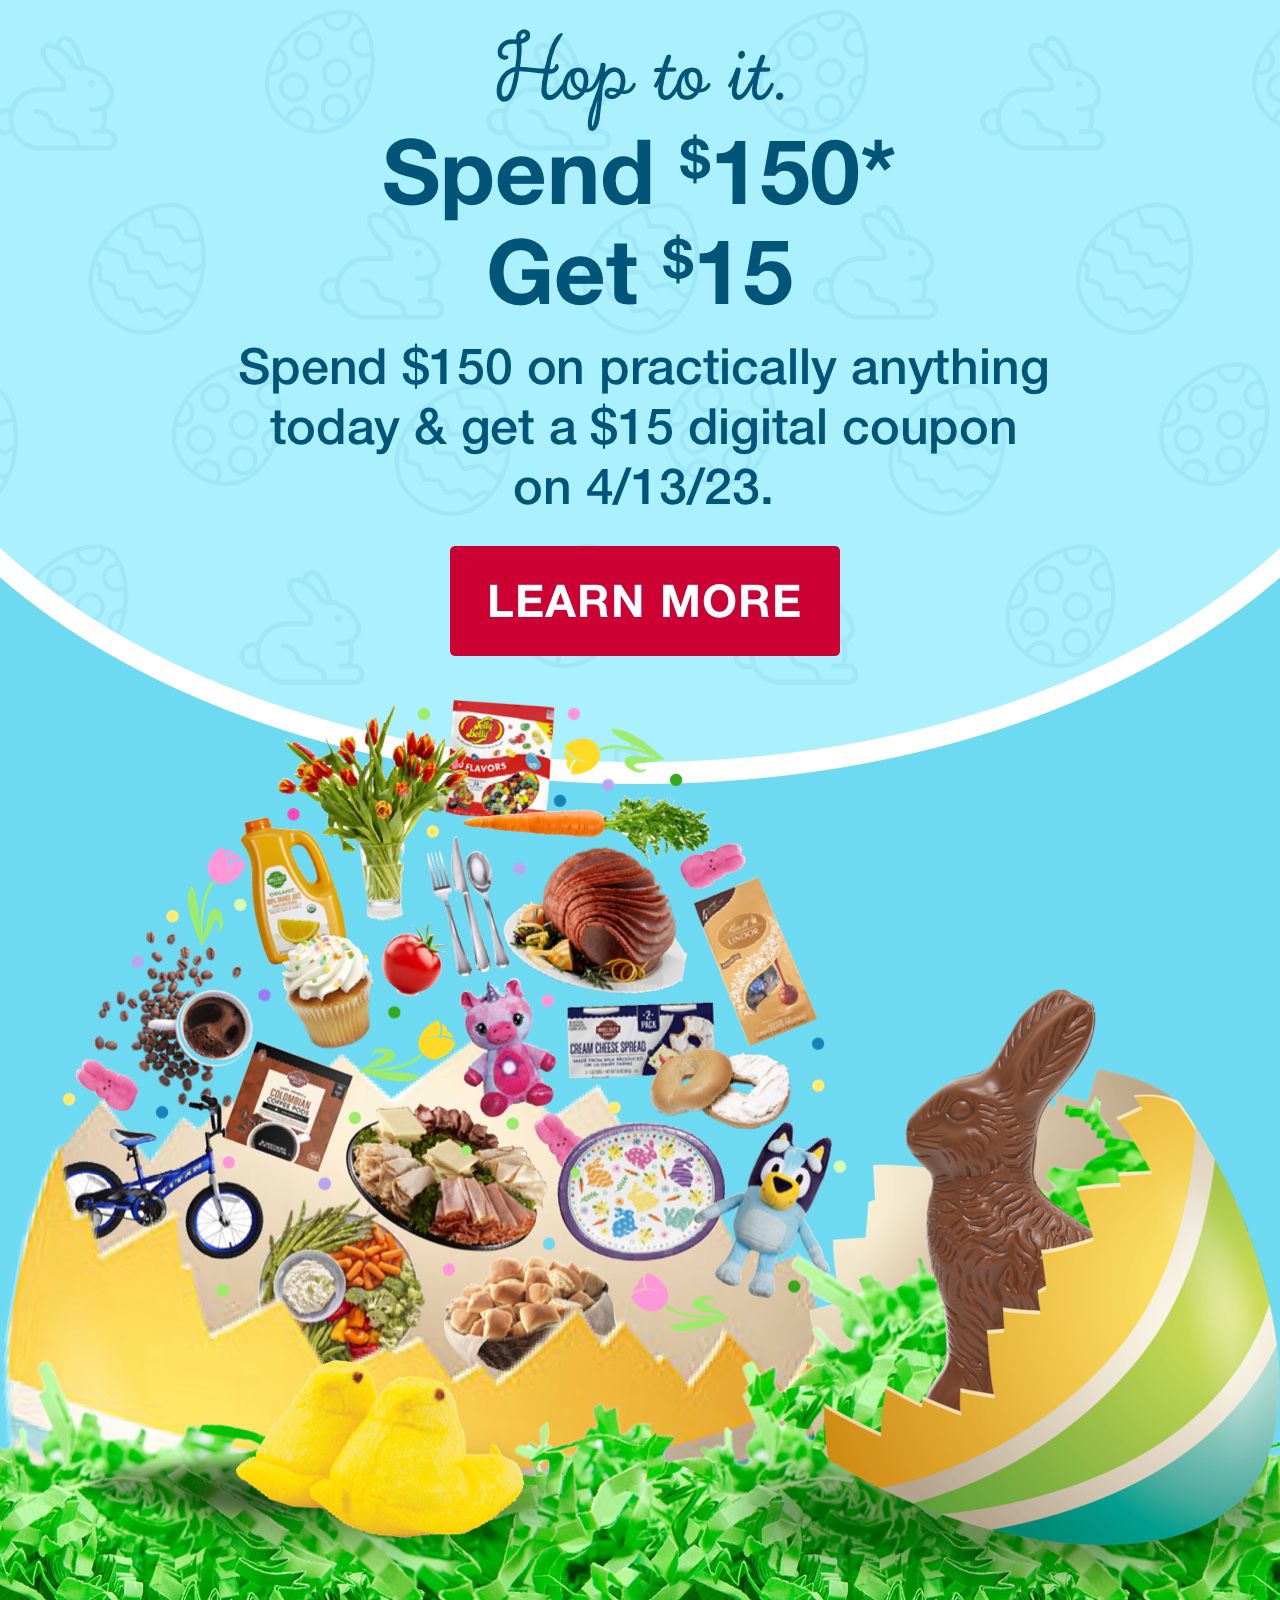 Hop to it. Spend $150* Get $15. Spend $150 on practically anything today and get a $15 digital coupon on 4/13/23. Click to learn more